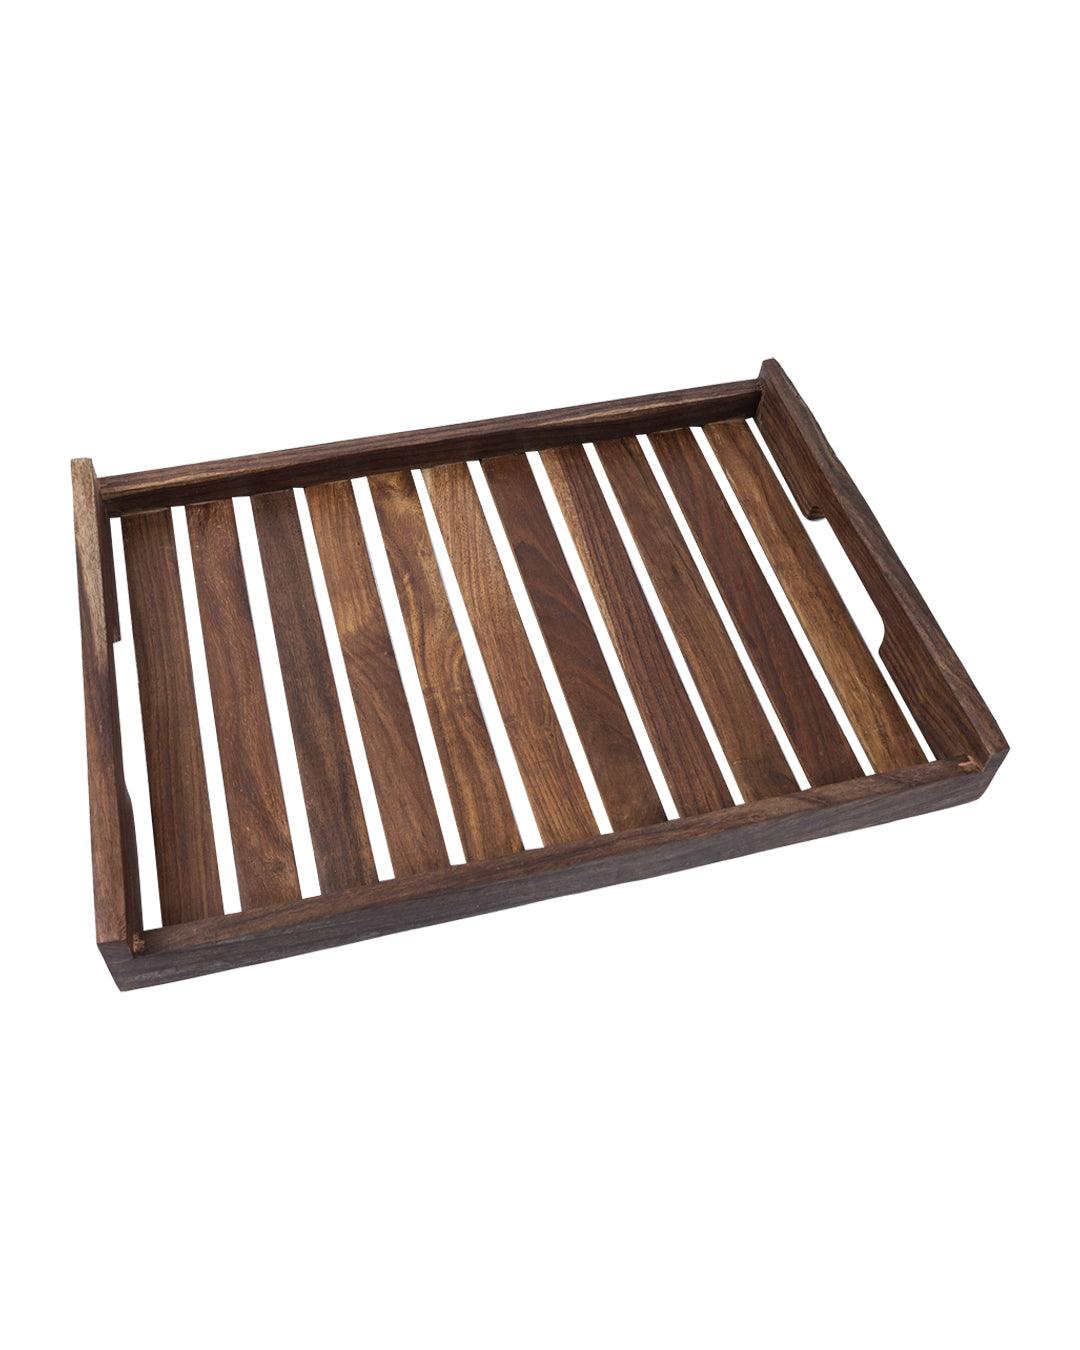 Sheesham Wood Handcrafted Large Serving Trays